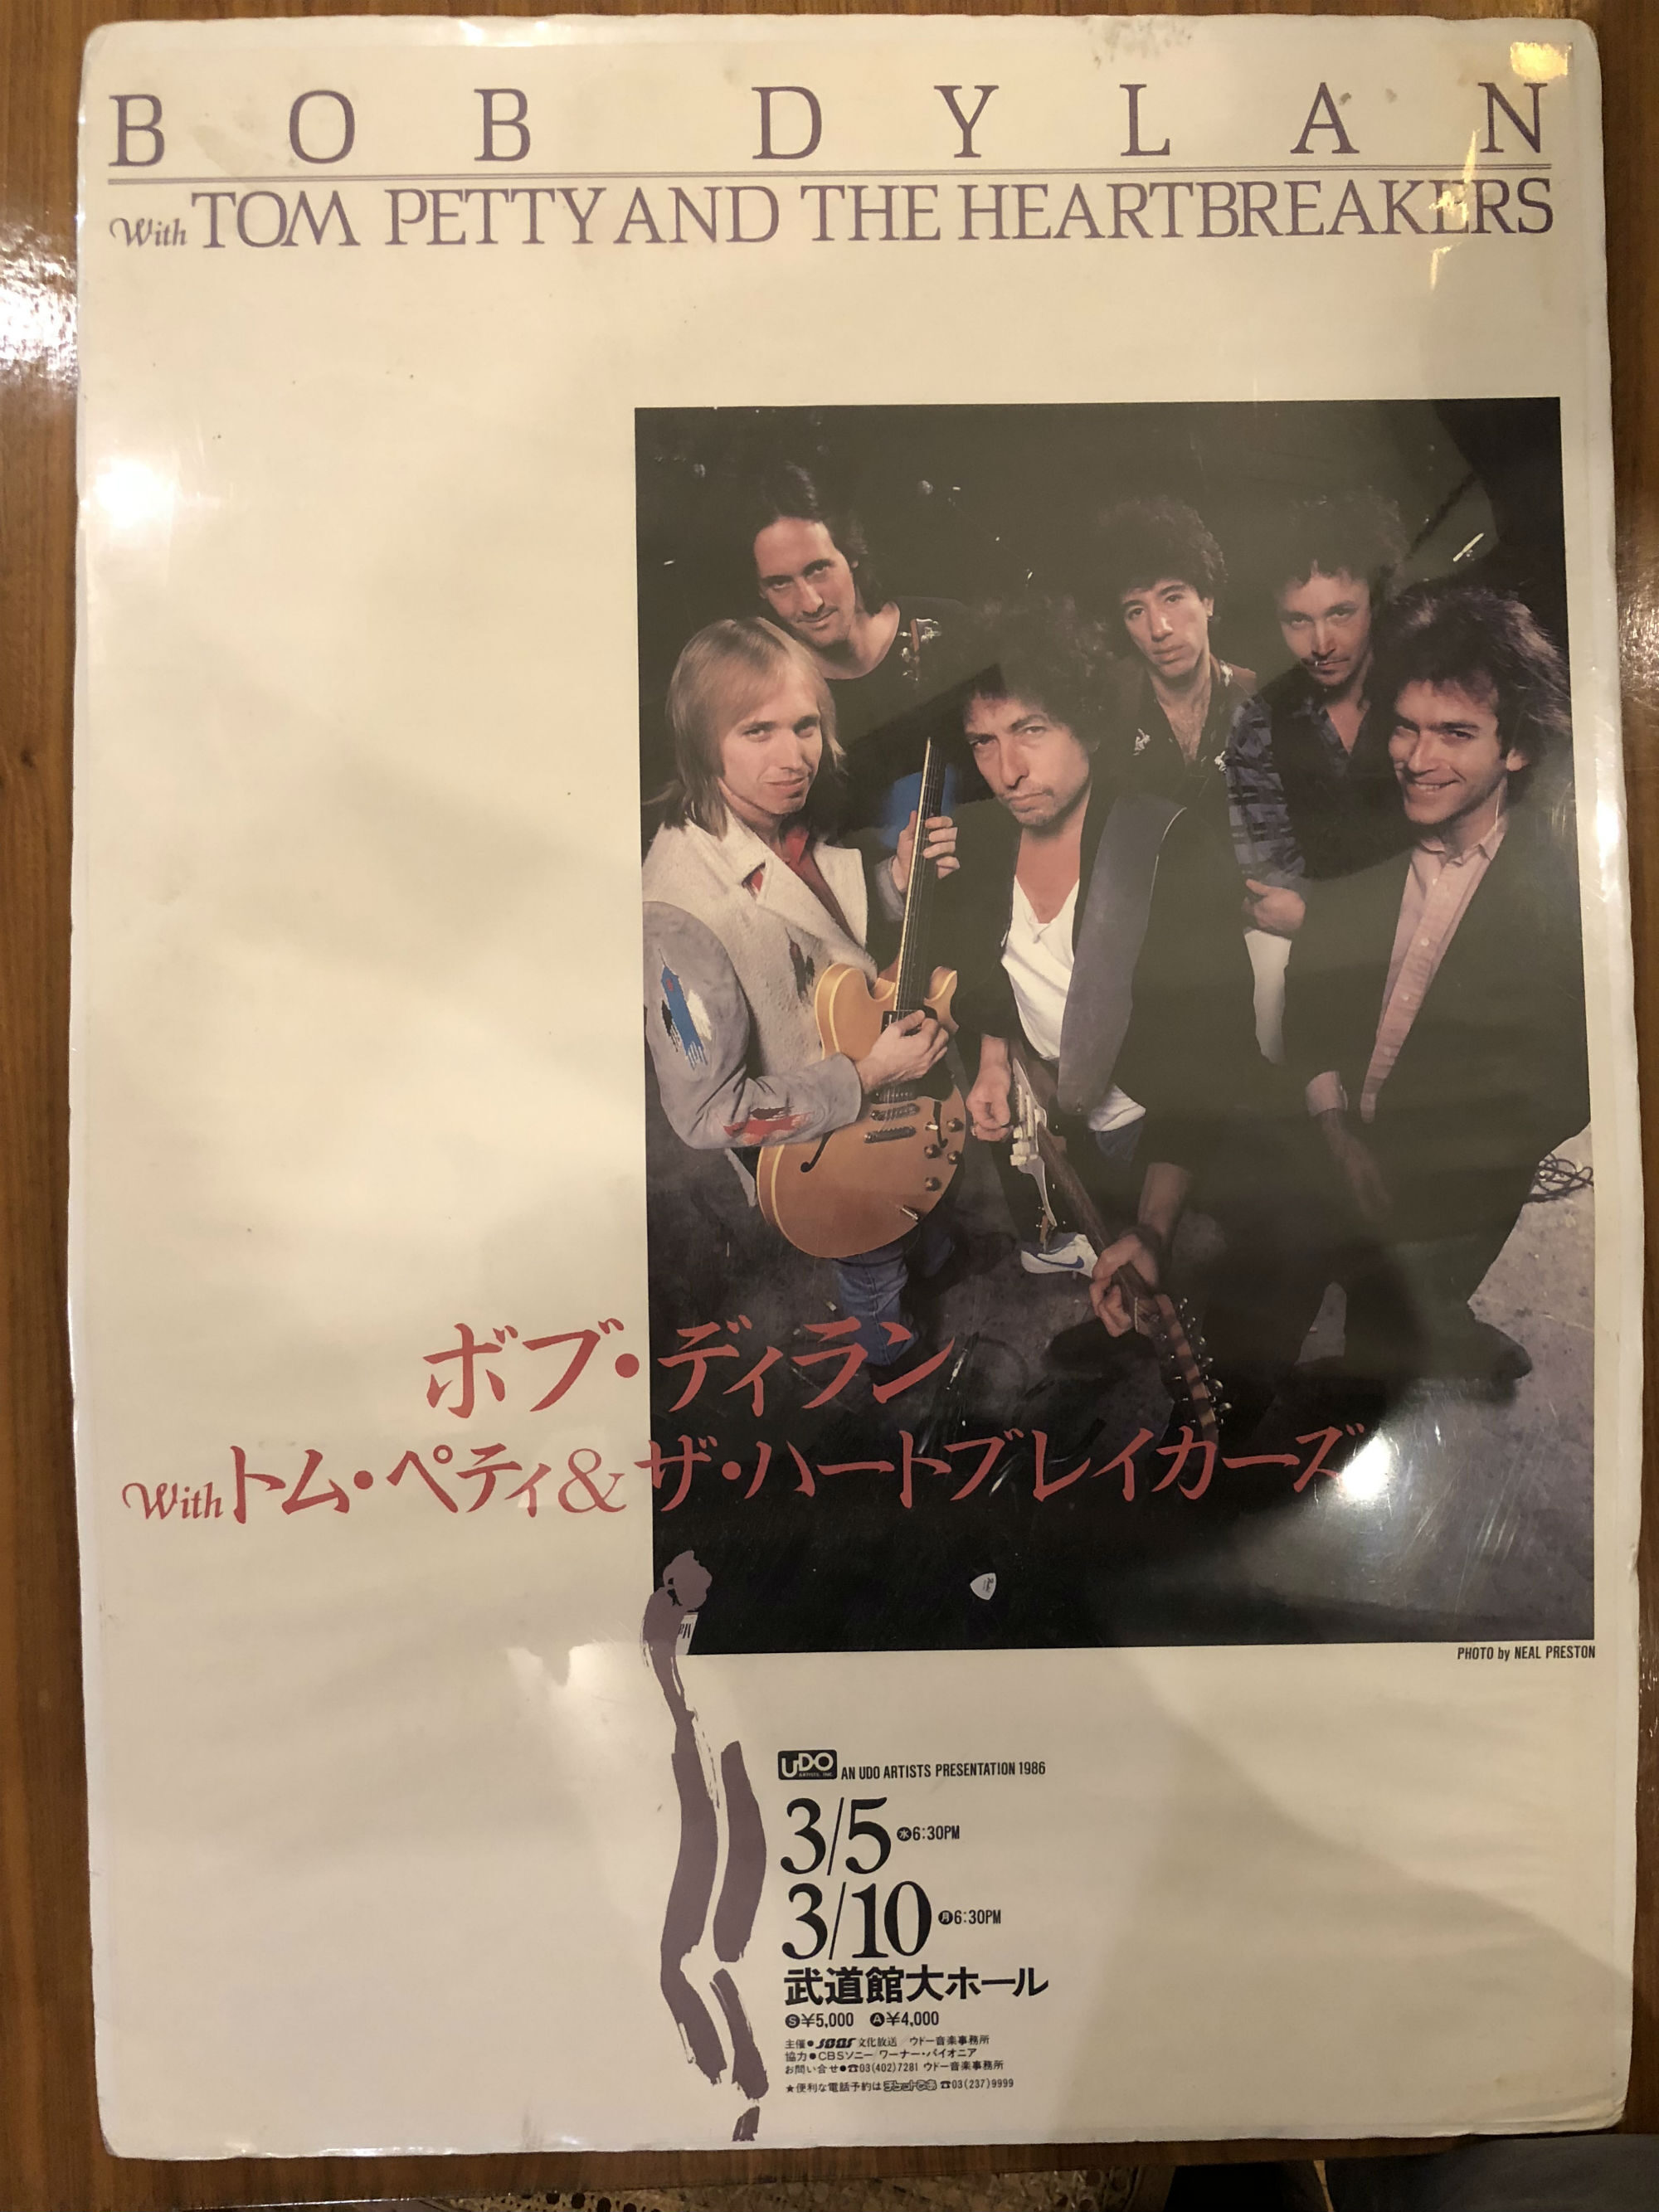 Vintage Bob Dylan Tom Petty And The Heartbreakers 1986 True Confessions Tour Tokyo Japan Poster March 5 And 10 Classic Memorabilia Muhammad Ali Autographed Posters Pennants Pinbacks Vintage Collectibles Souvenirs